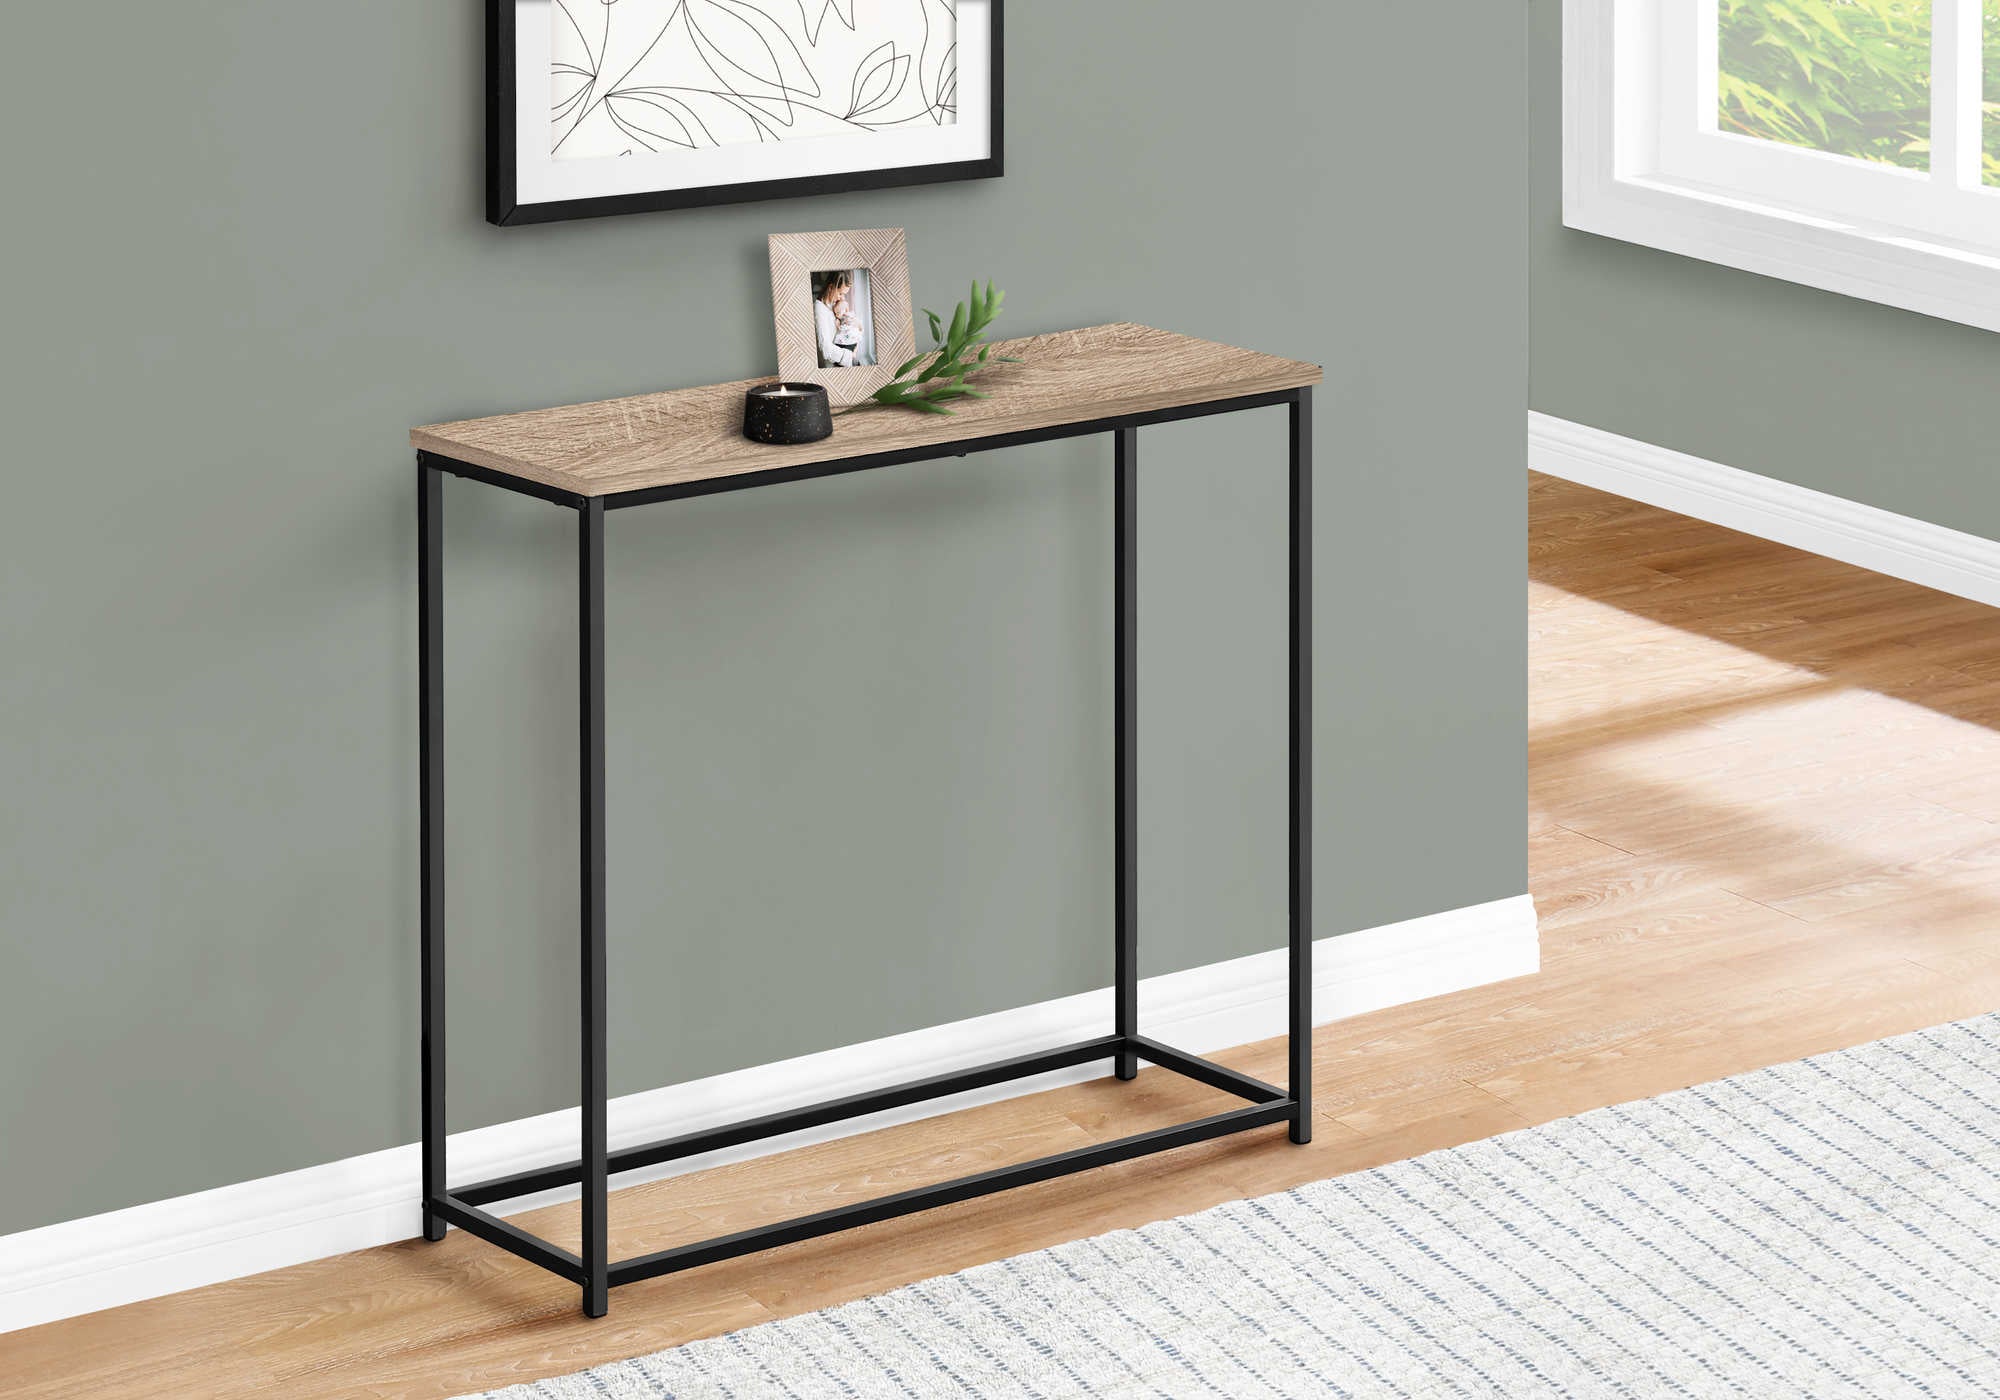 I 2253 - ACCENT TABLE - 32"L / DARK TAUPE / BLACK METAL CONSOLE BY MONARCH SPECIALTIES INC